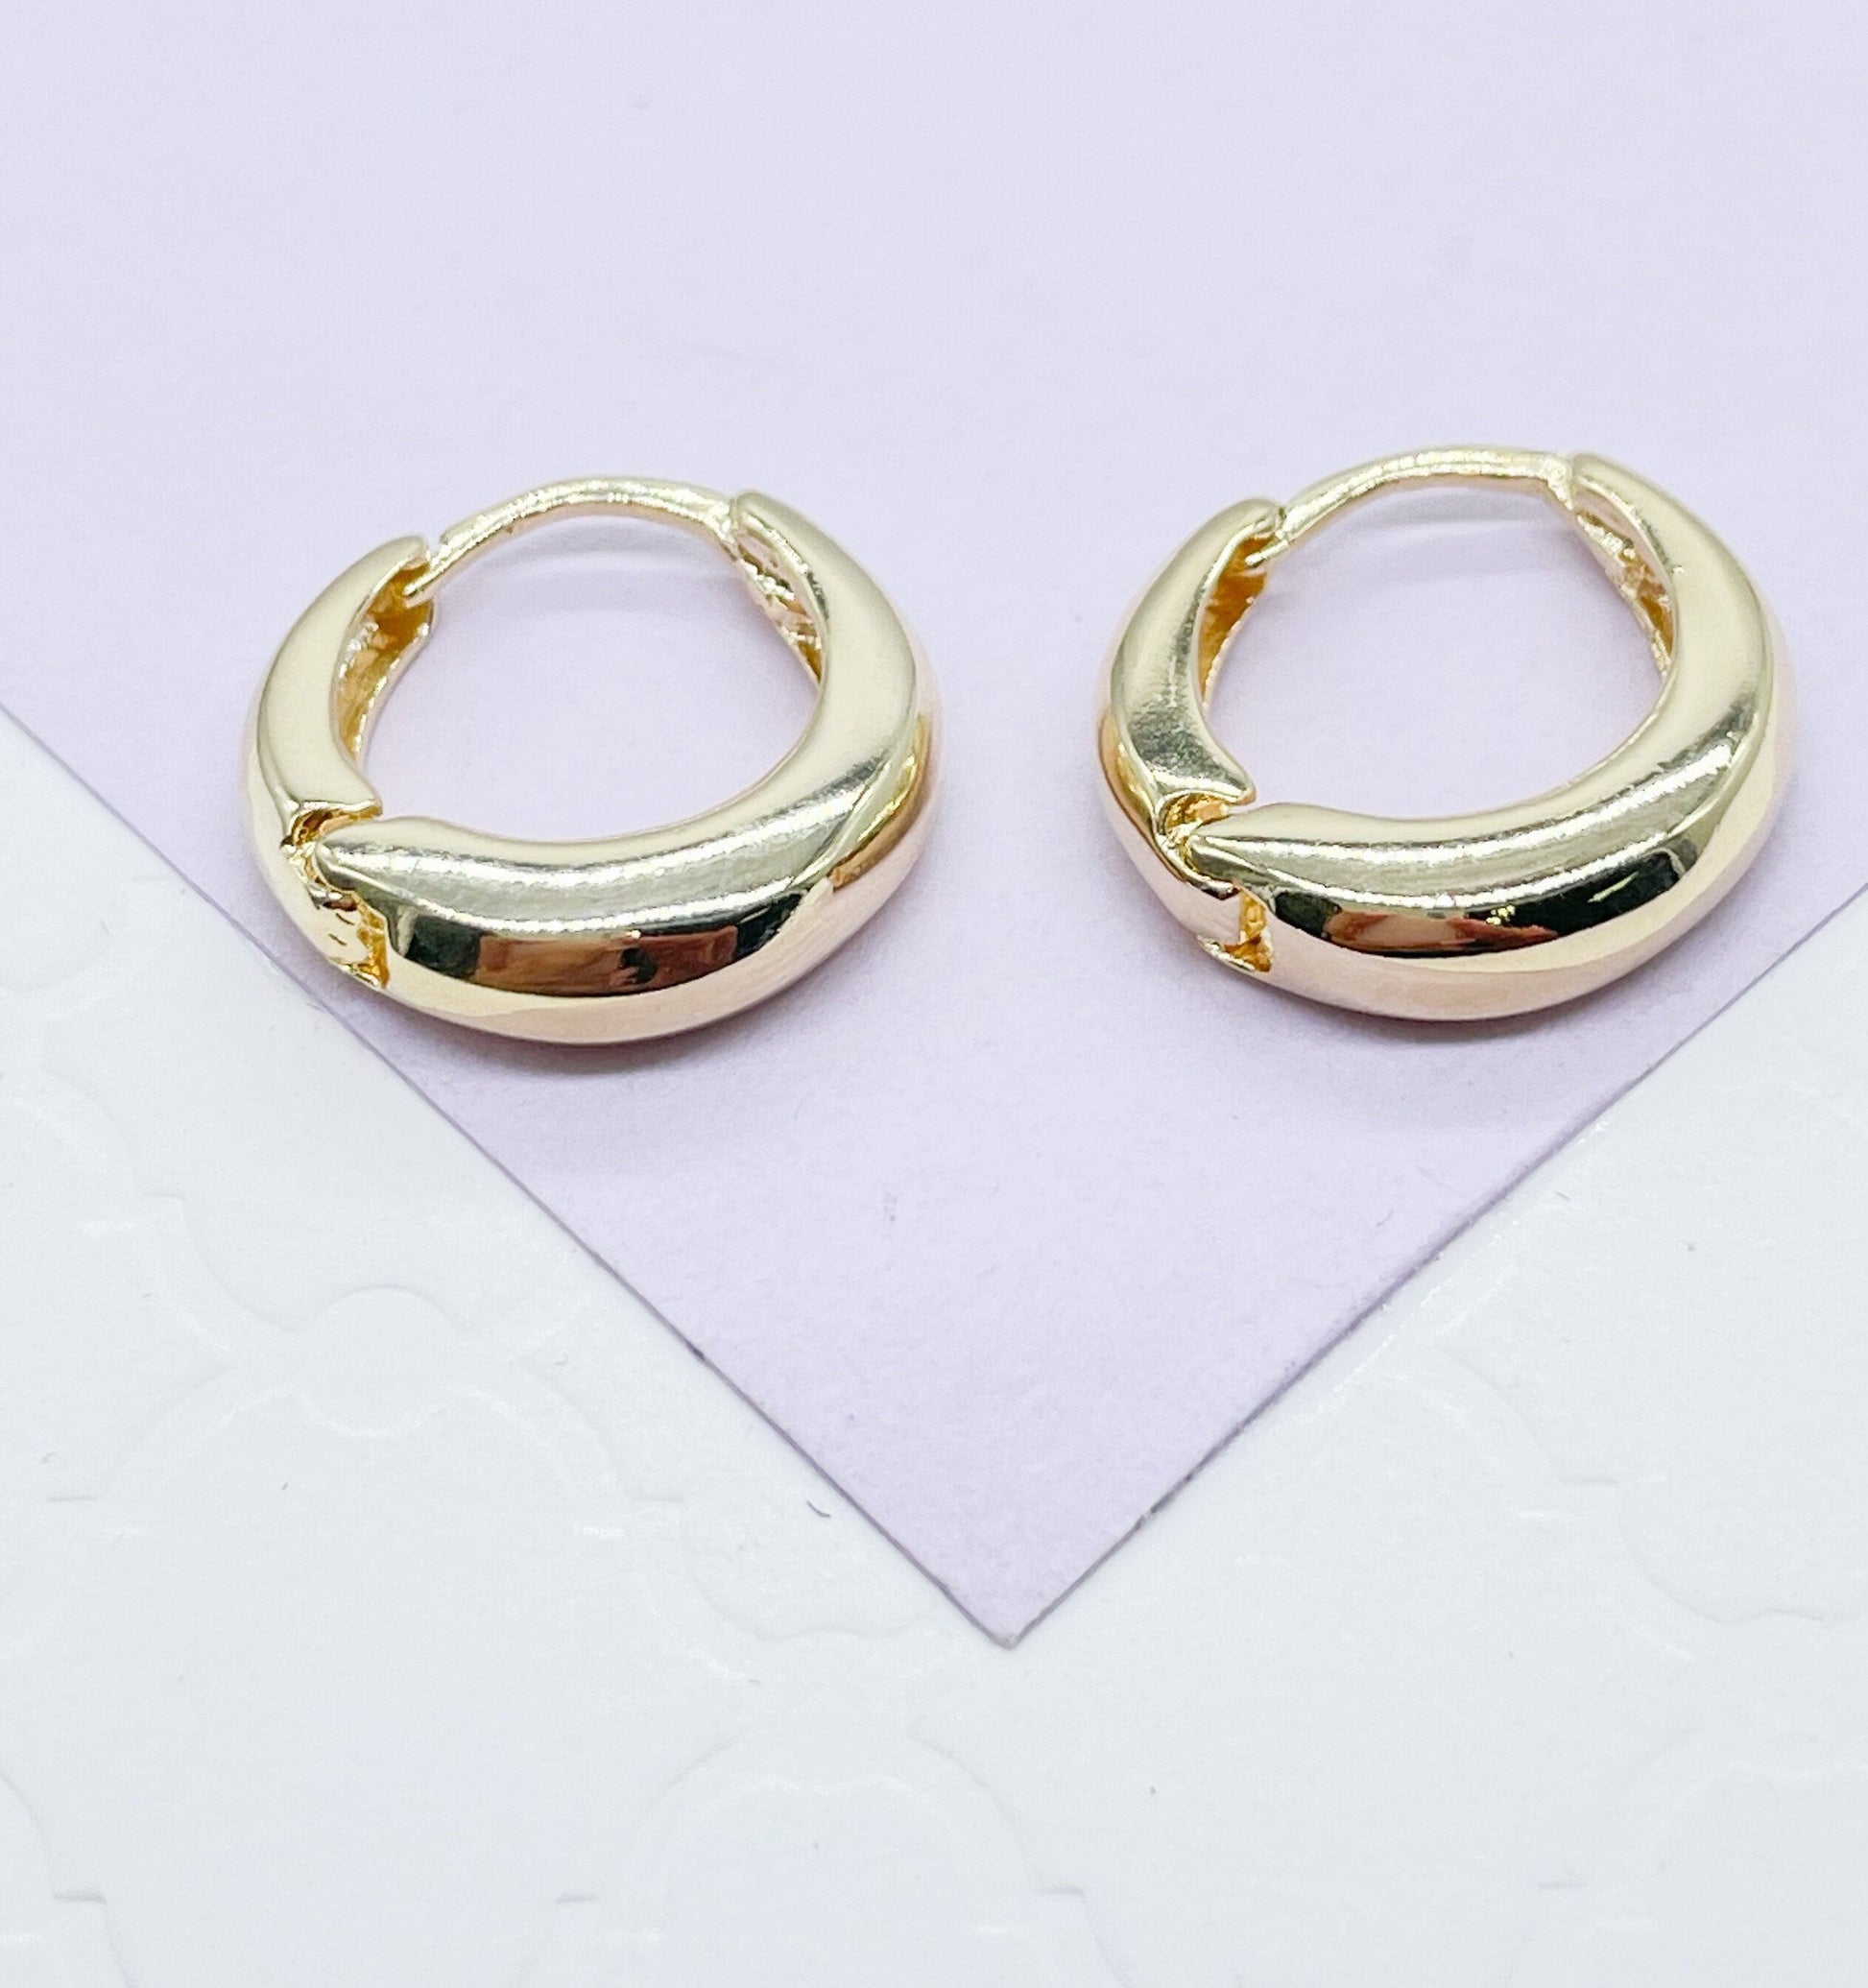 18k Gold Filled Smooth Plain Dome Huggie Earrings